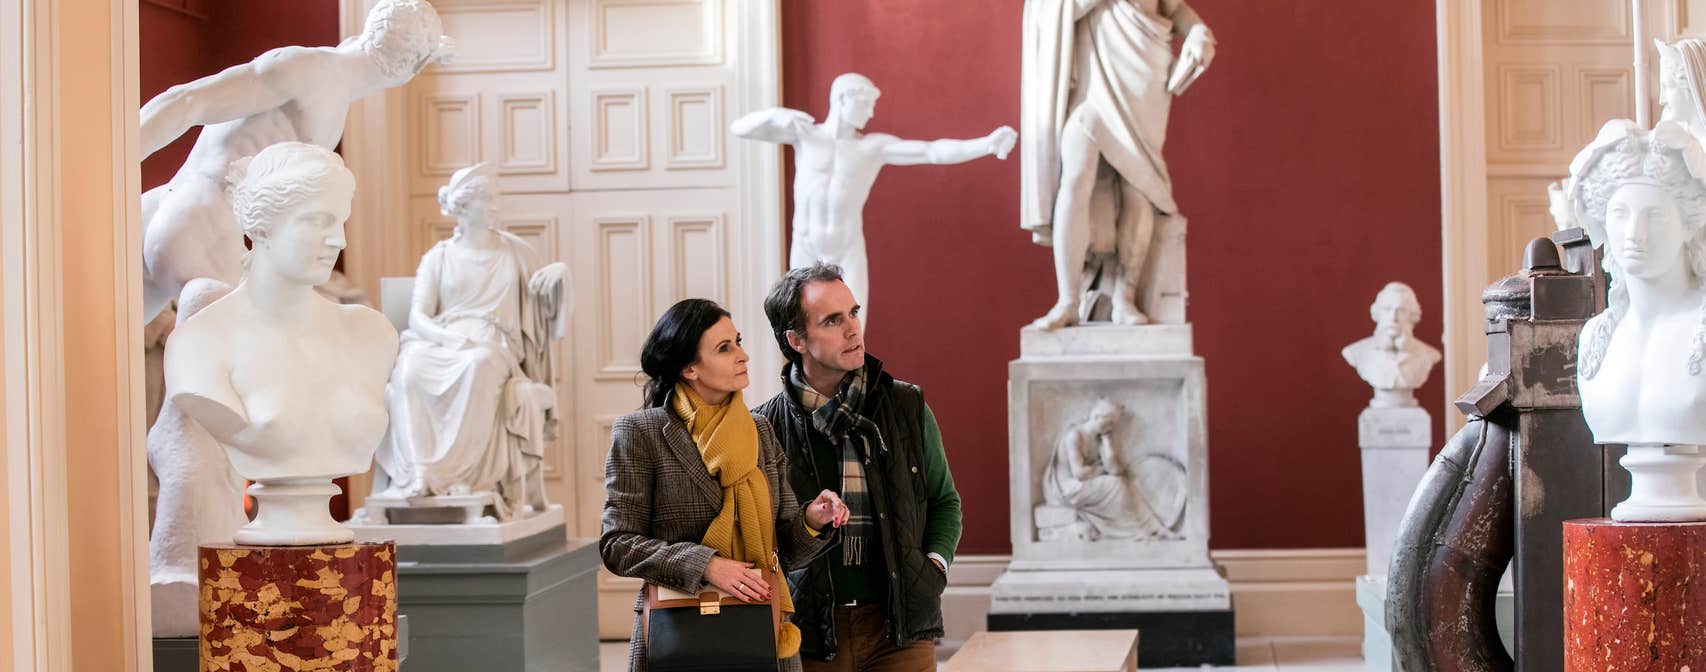 A couple admiring the statues on display at the Crawford Art Gallery in Cork city